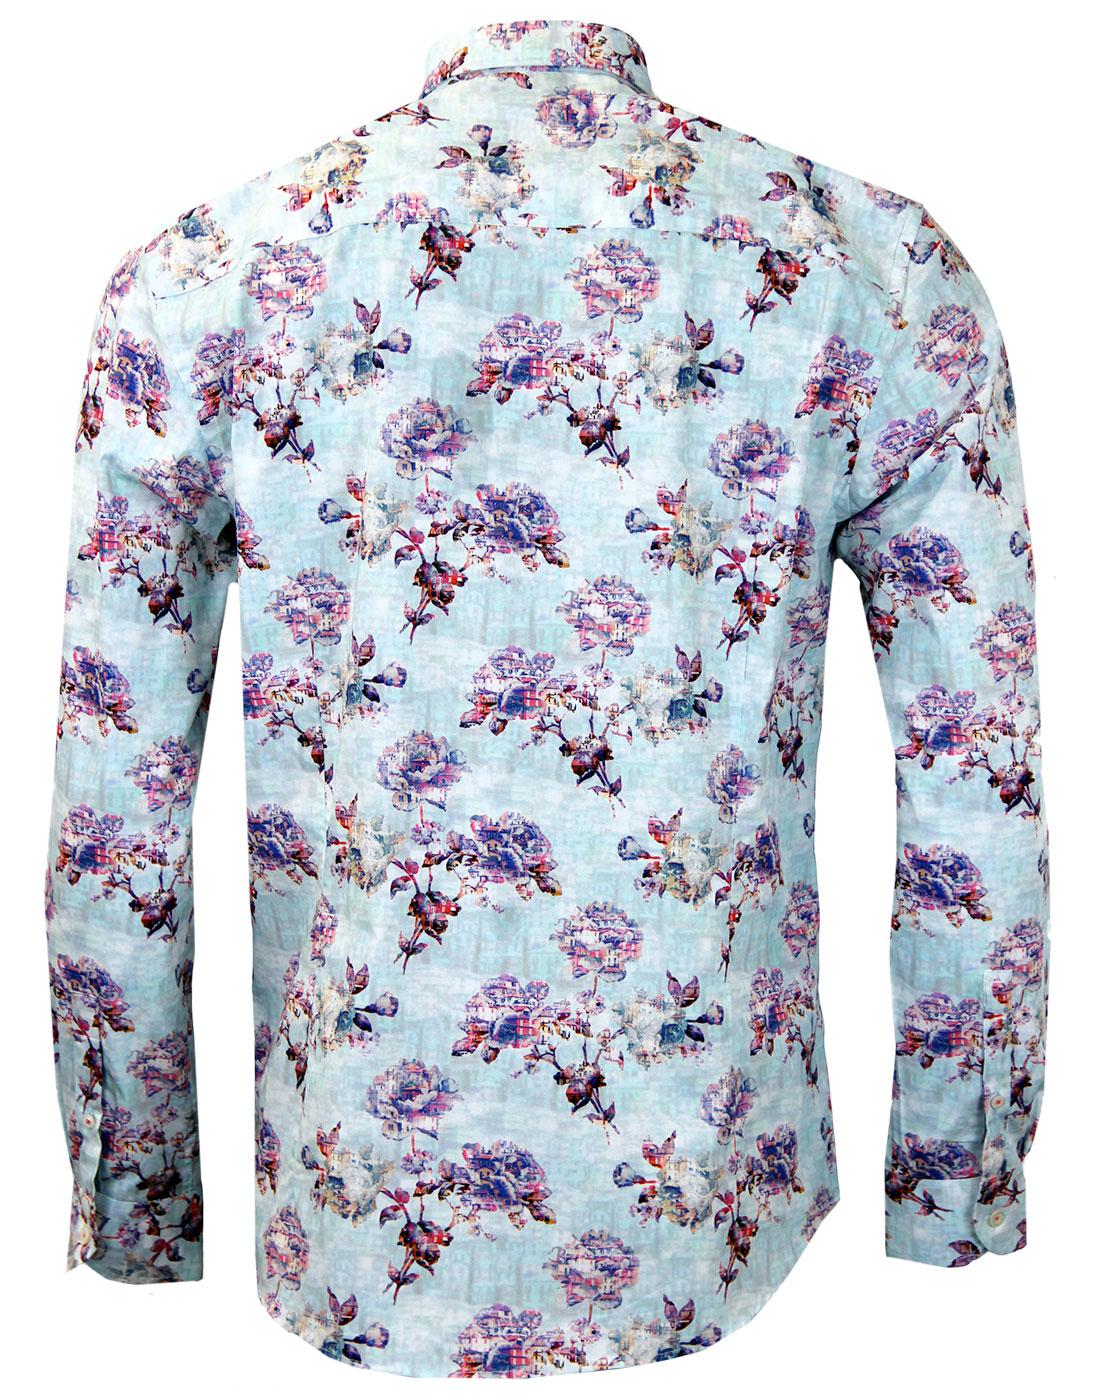 1 LIKE NO OTHER Brimstone Retro Abstract Floral Cityscape Shirt